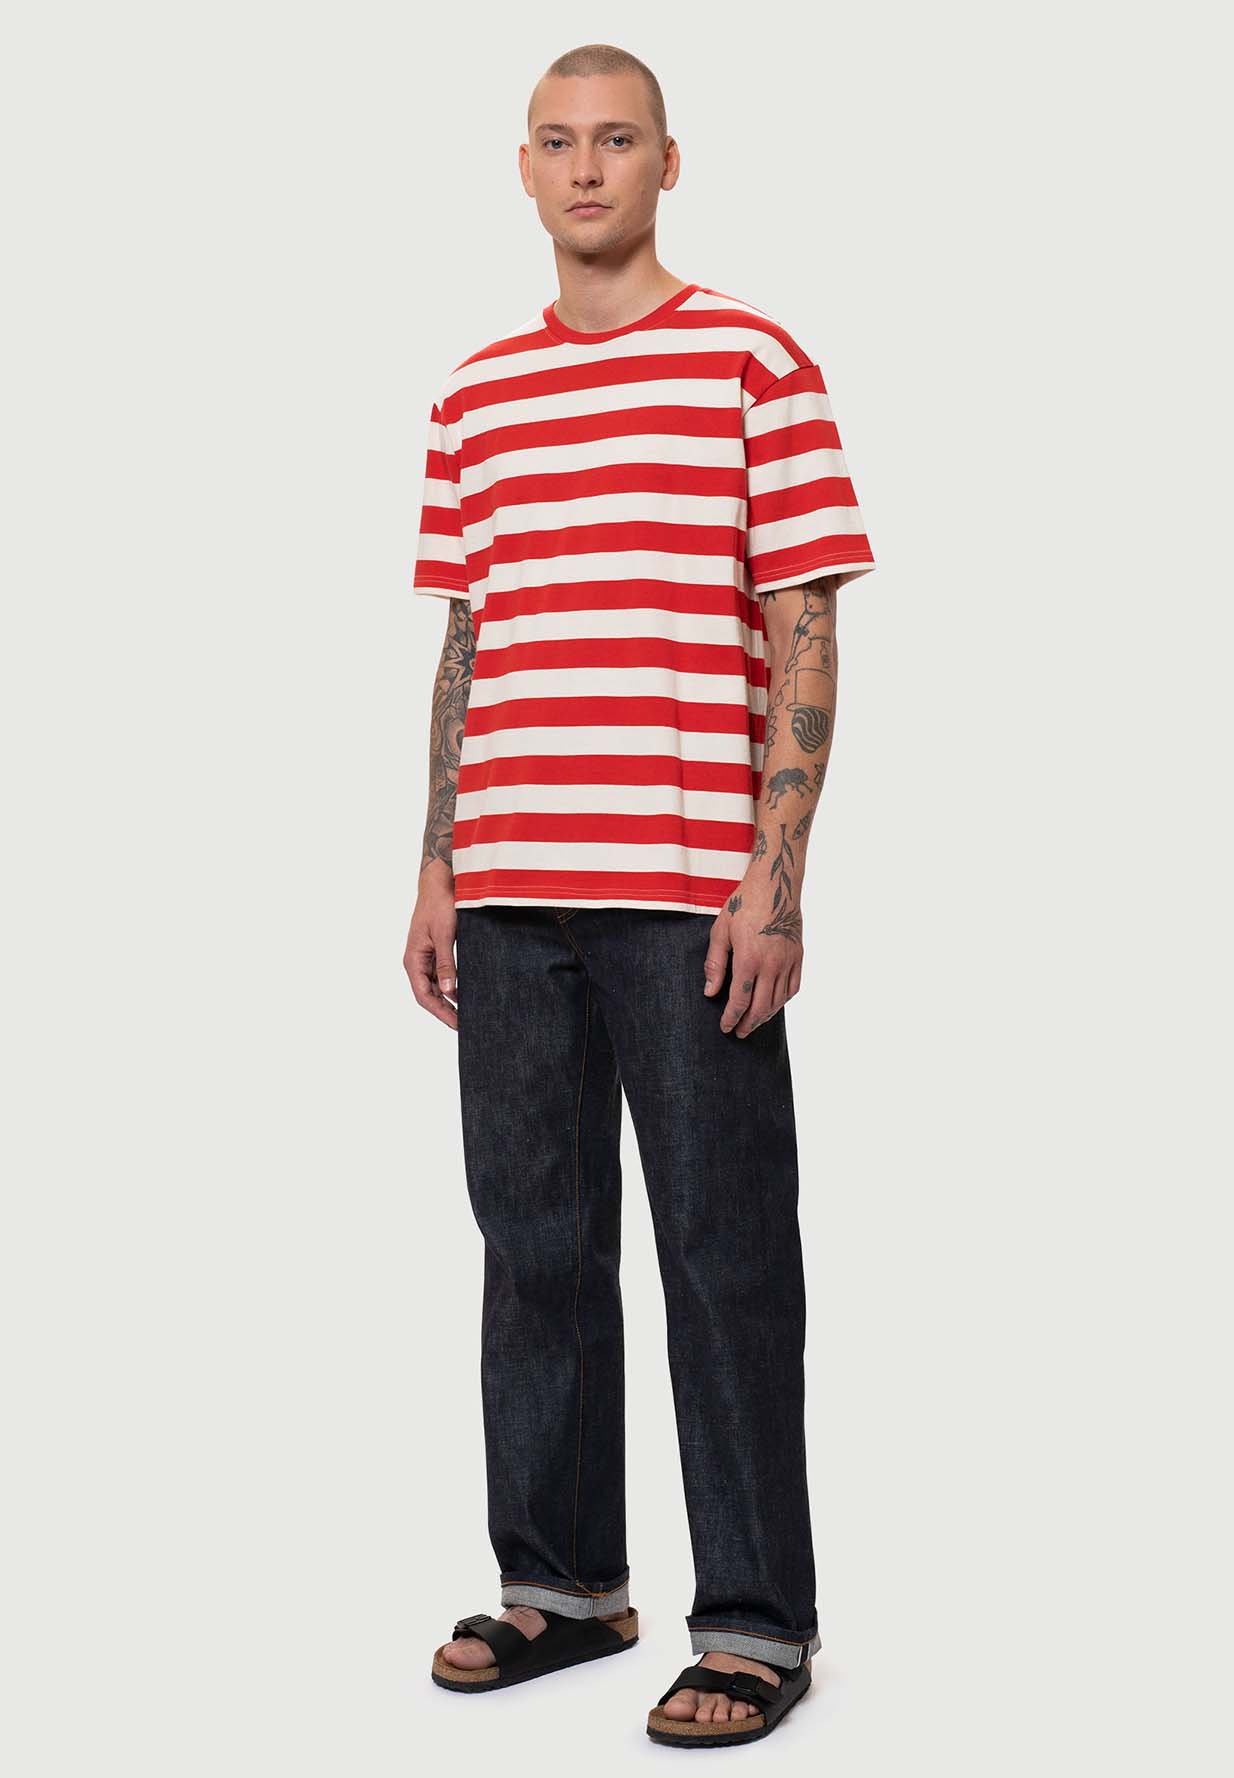 NUDIE JEANS T-Shirt Uno Block Stripe offwhite/red M